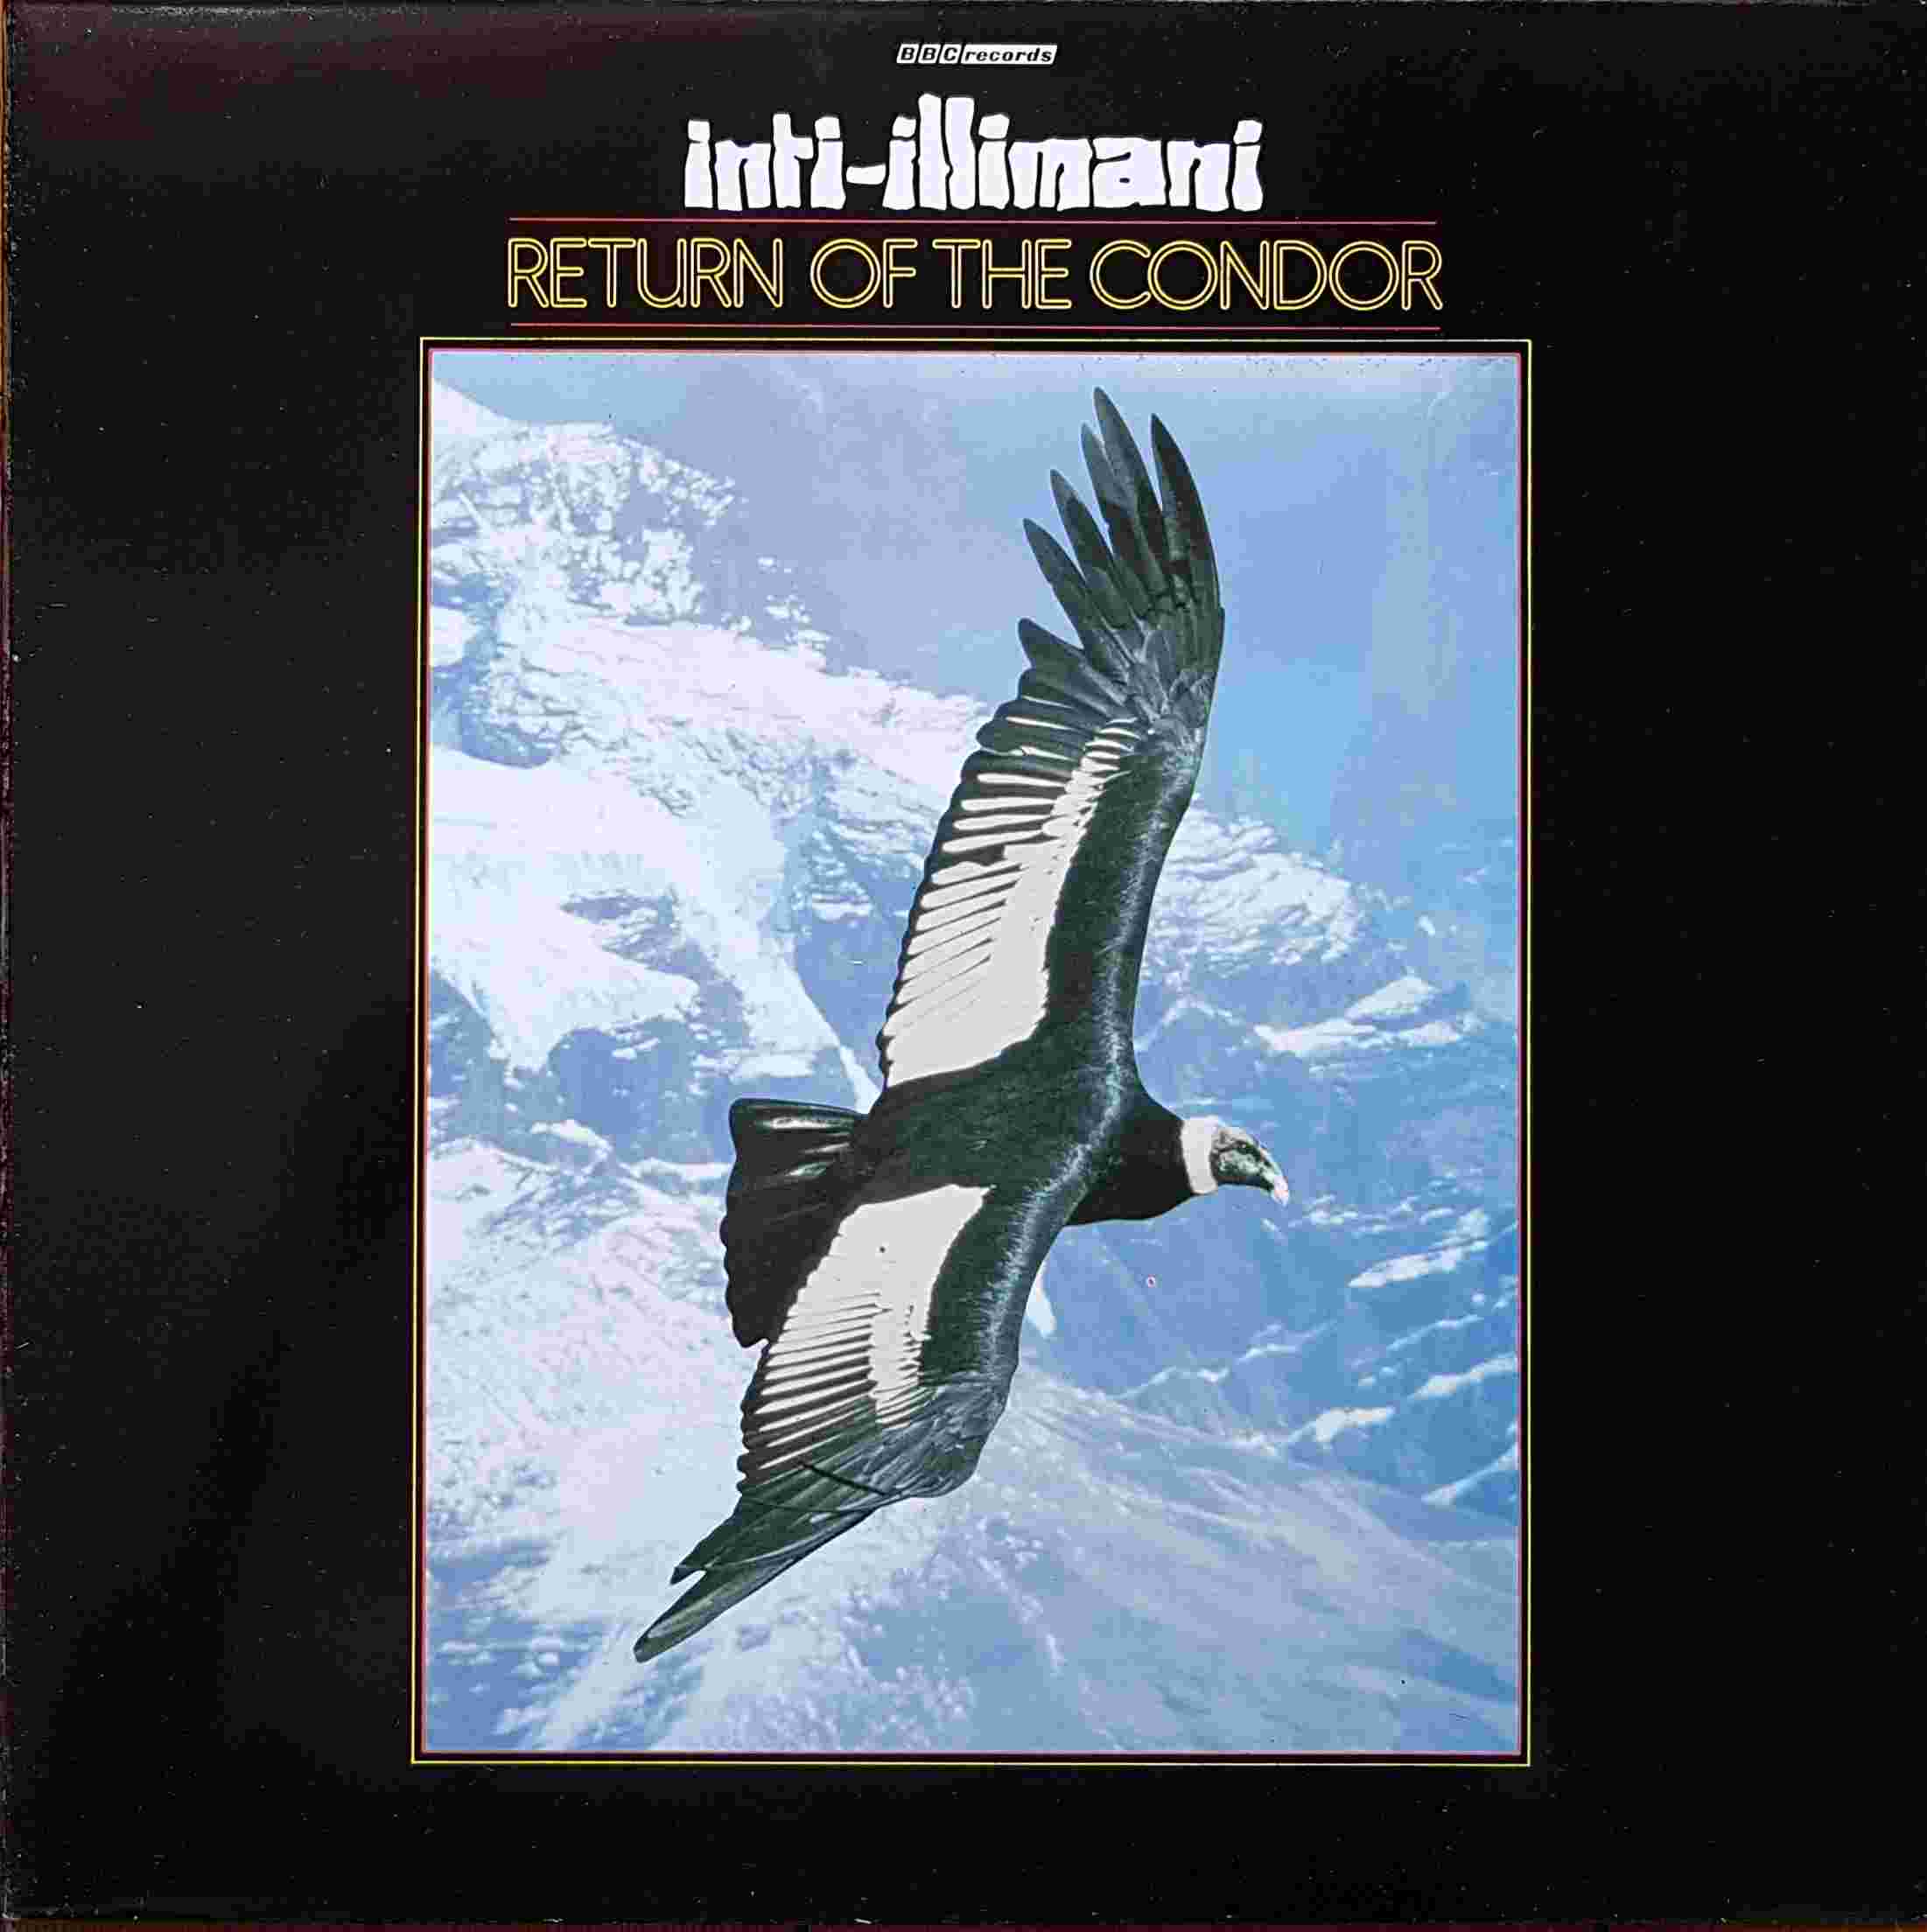 Picture of REH 515 Return of the condor by artist Inti Illimani from the BBC albums - Records and Tapes library